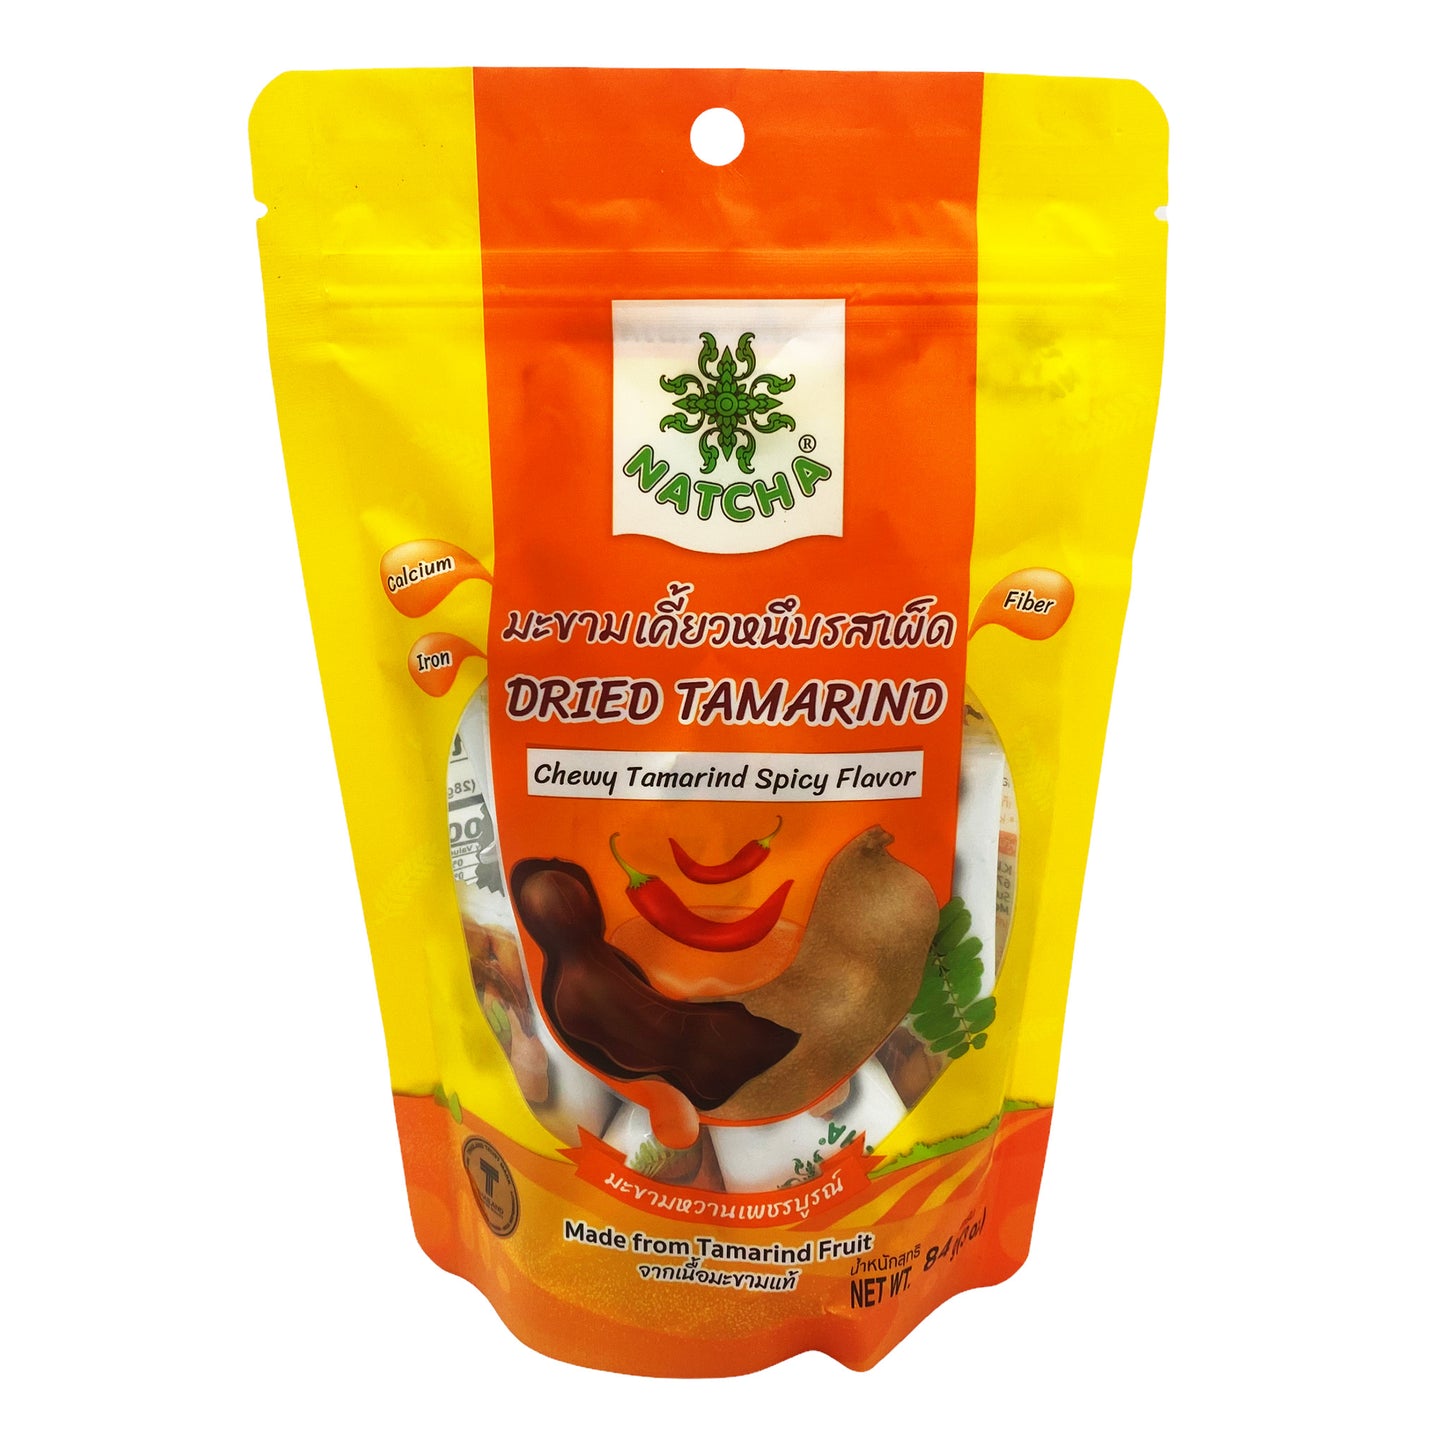 Front graphic image of Natcha Dried Chewy Tamarind - Spicy Flavor 3oz (84g)